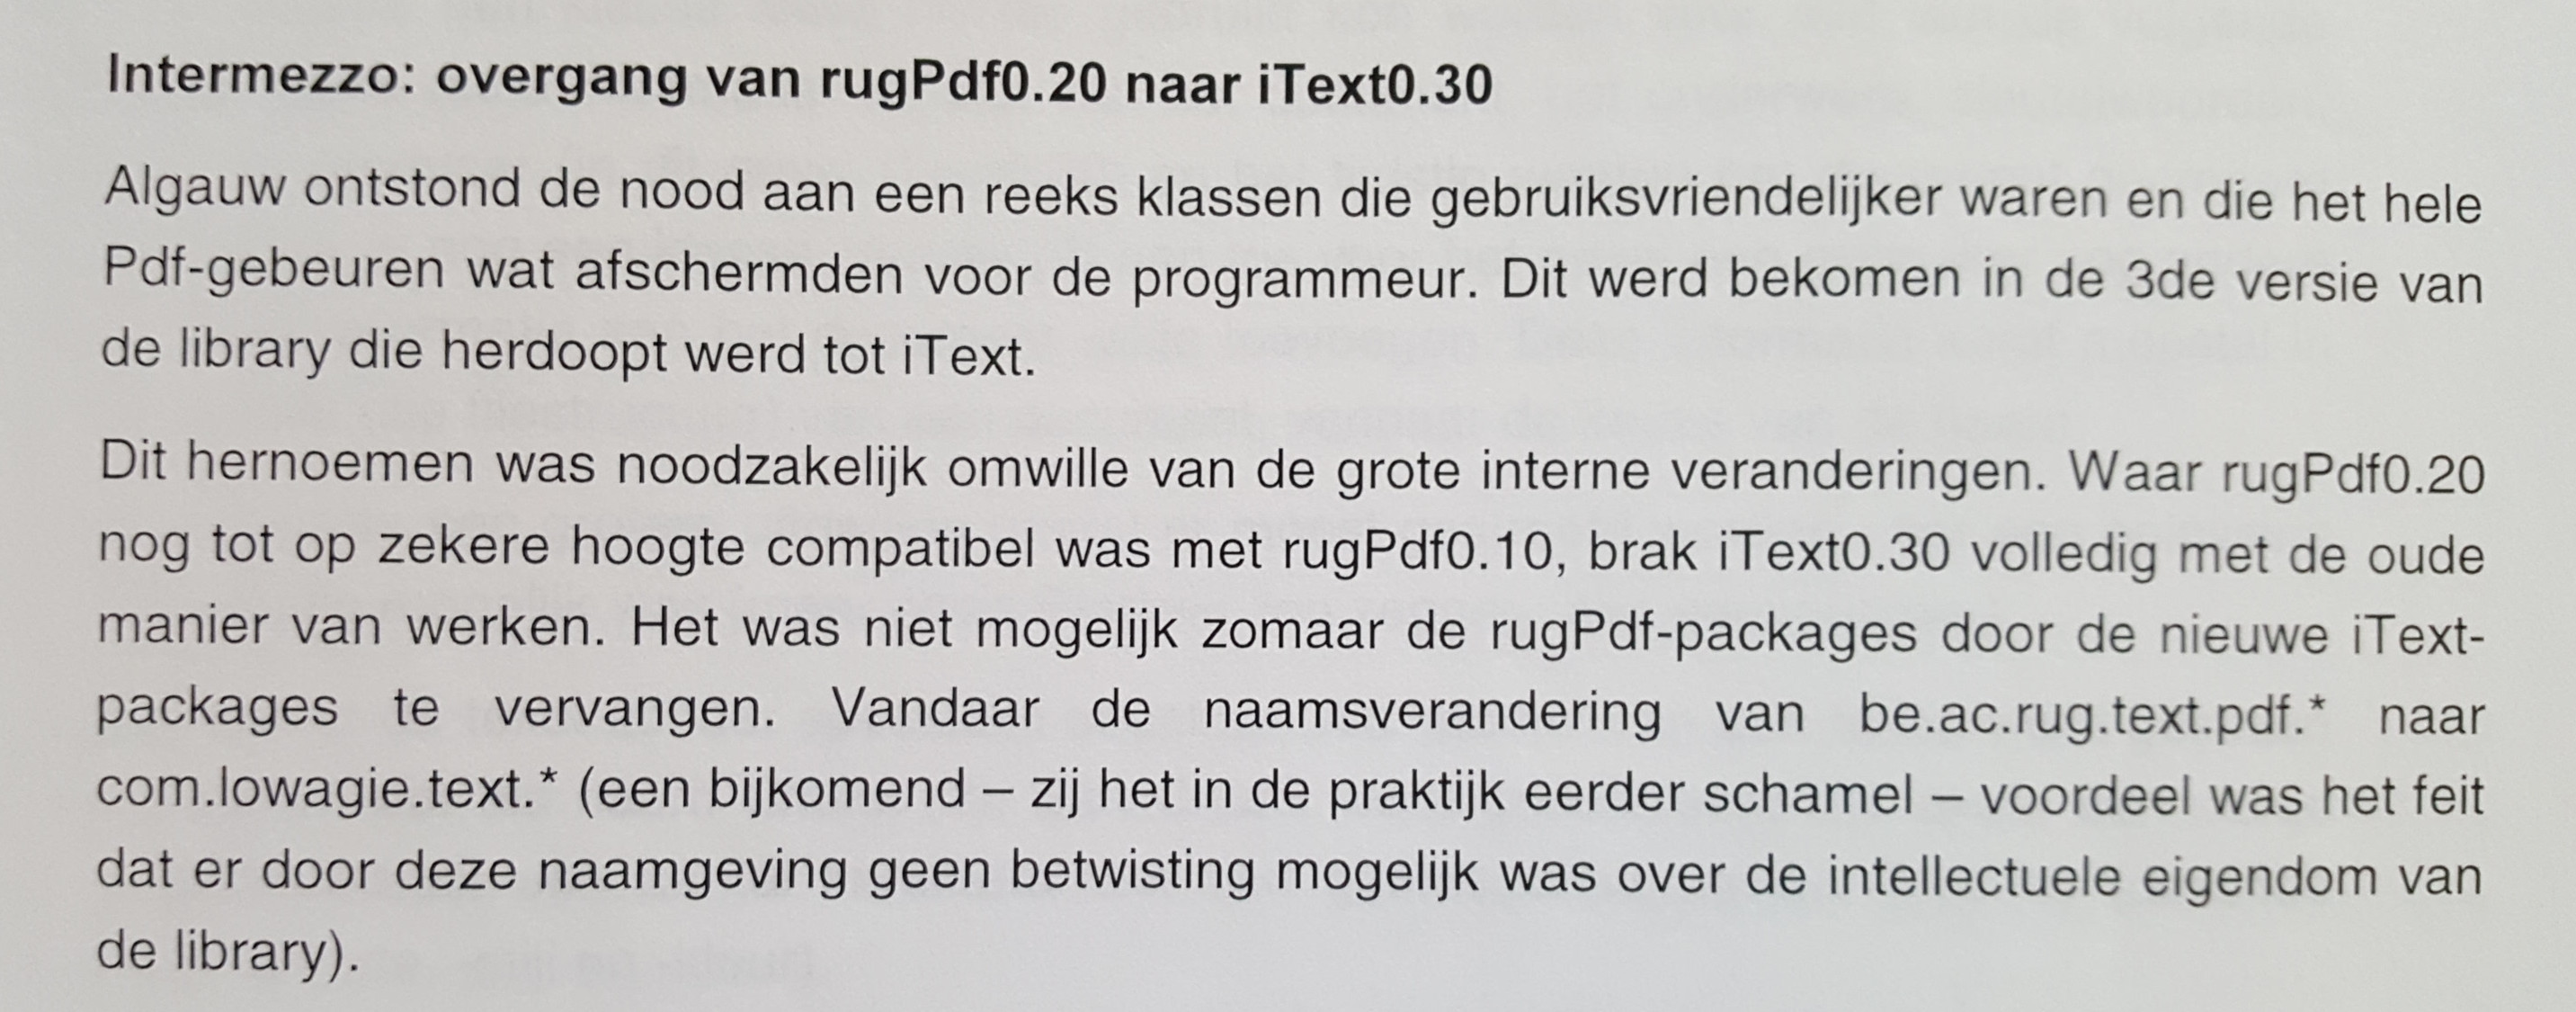 fragment paper about the difference between rugPdf and iText